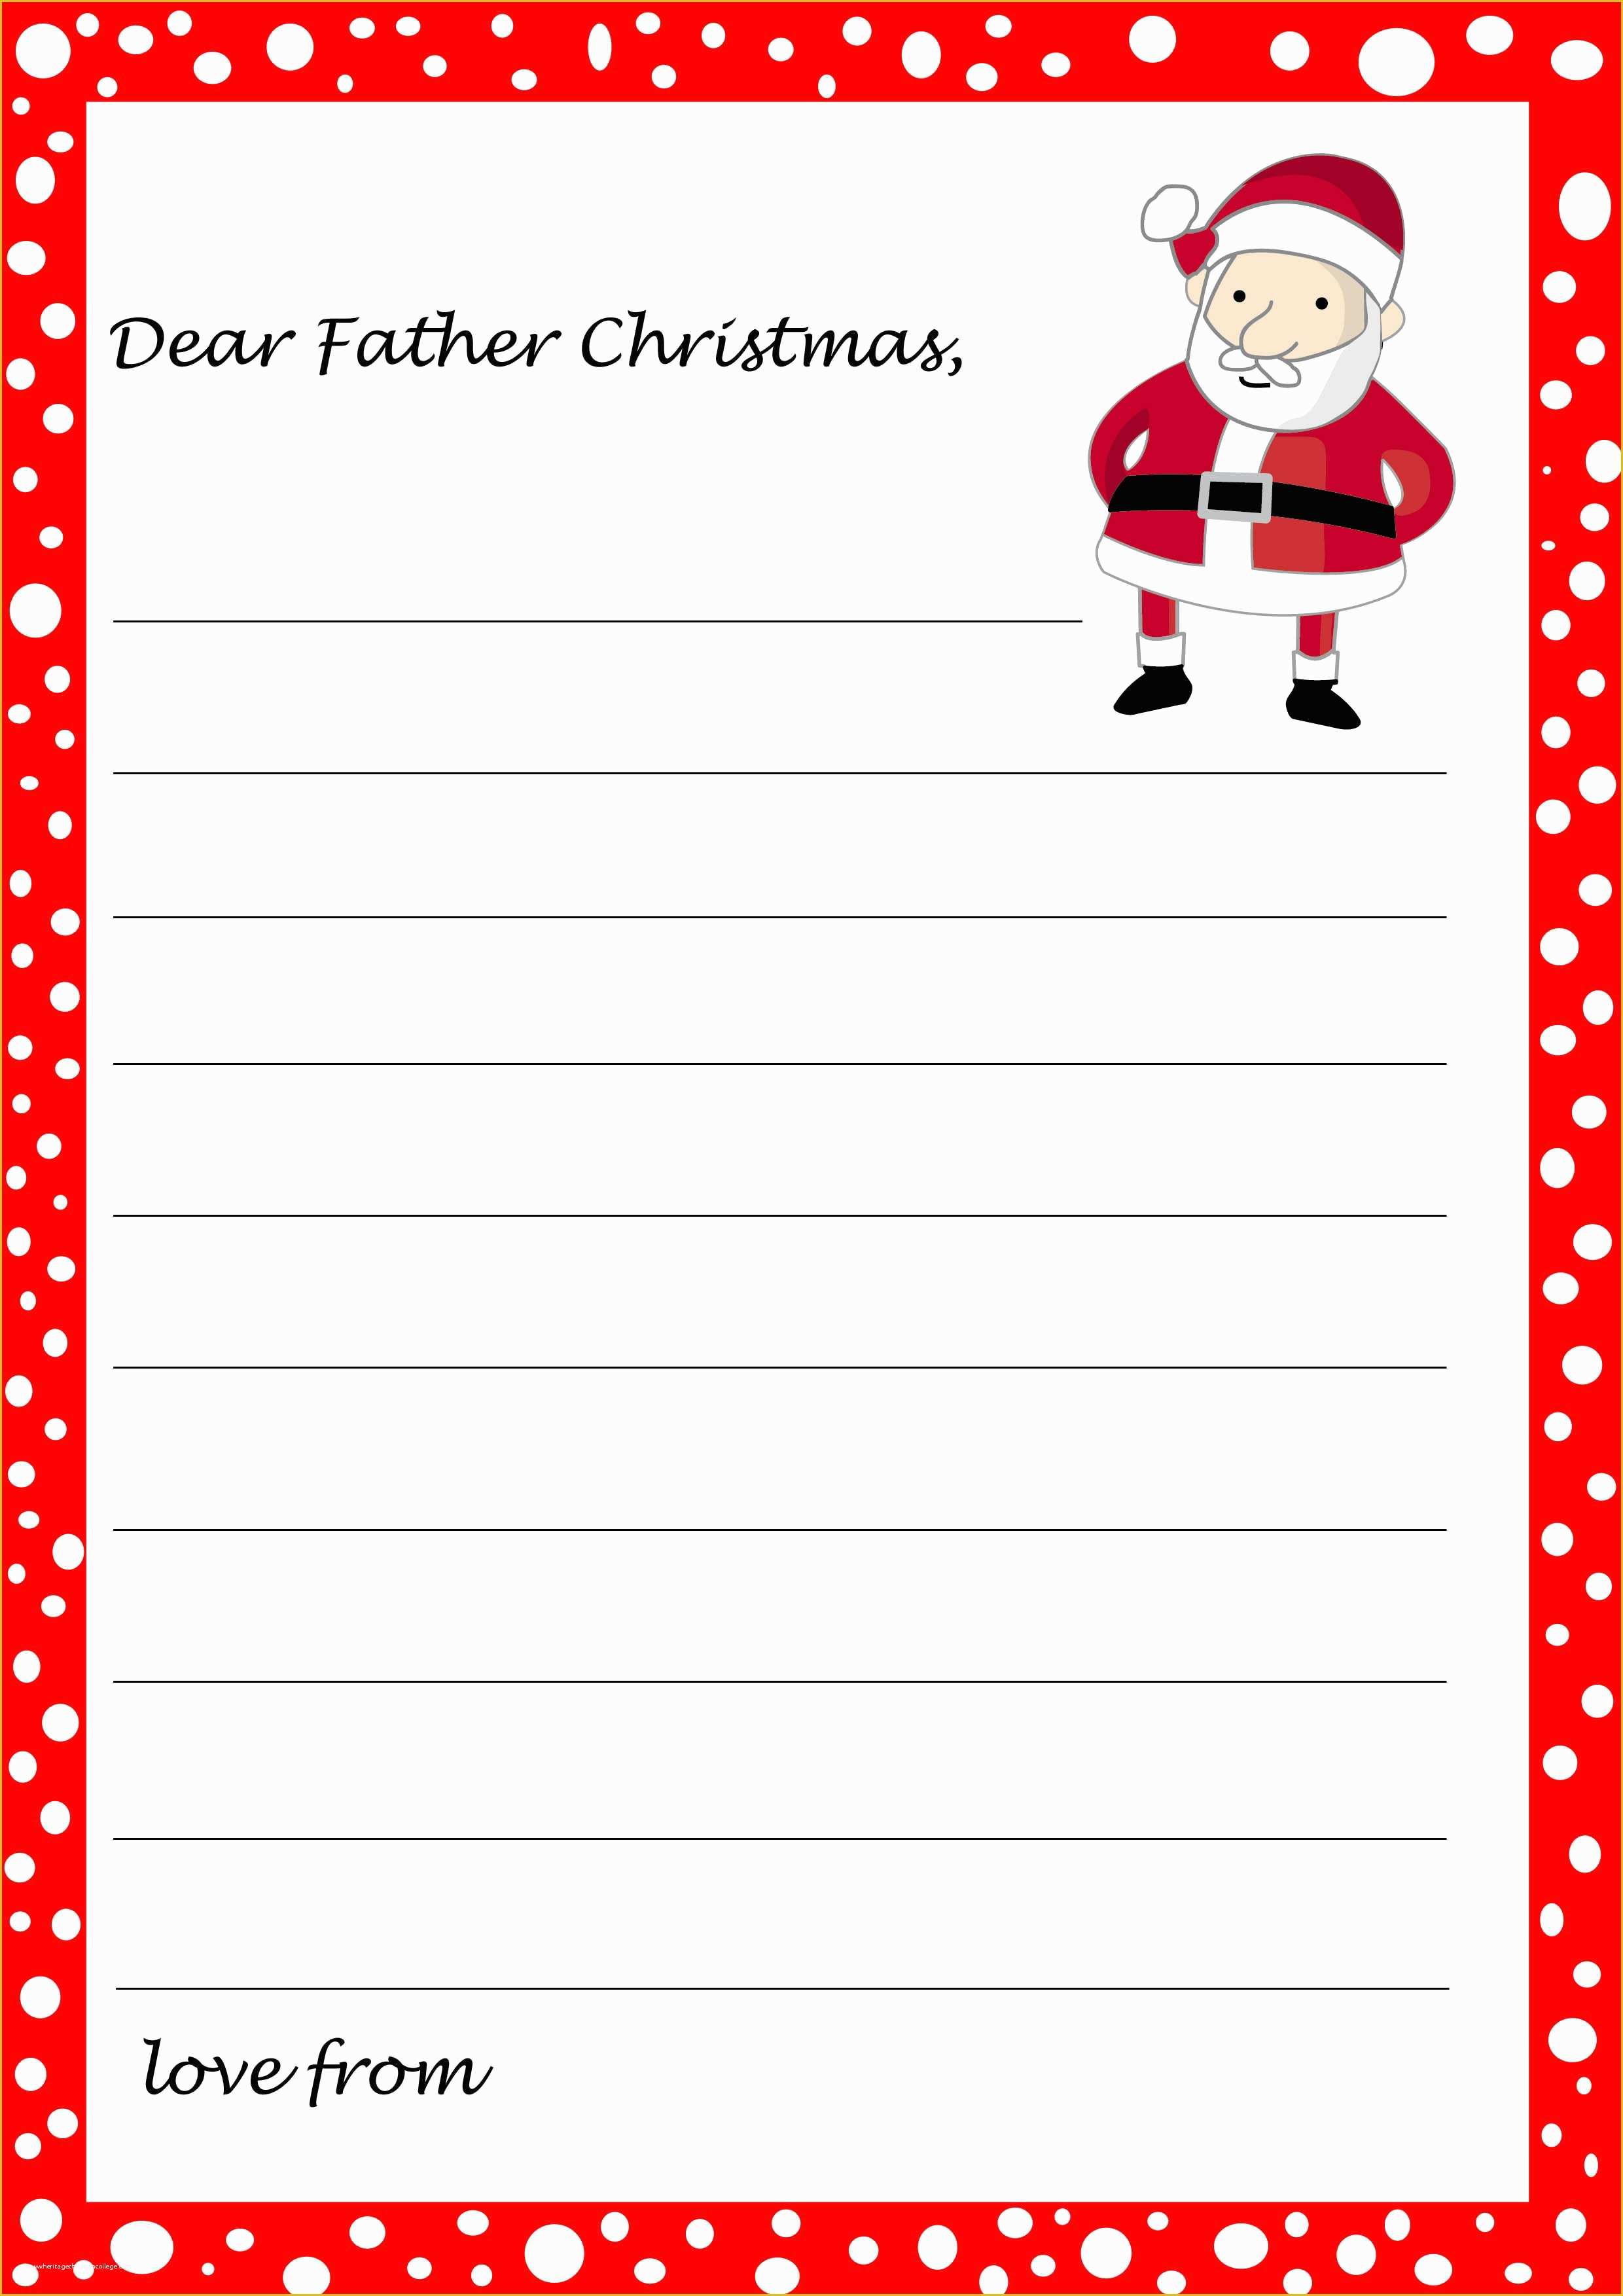 Free Printable Letter From Santa Word Template Of Free Printable Letter From Santa Word Template Christmas